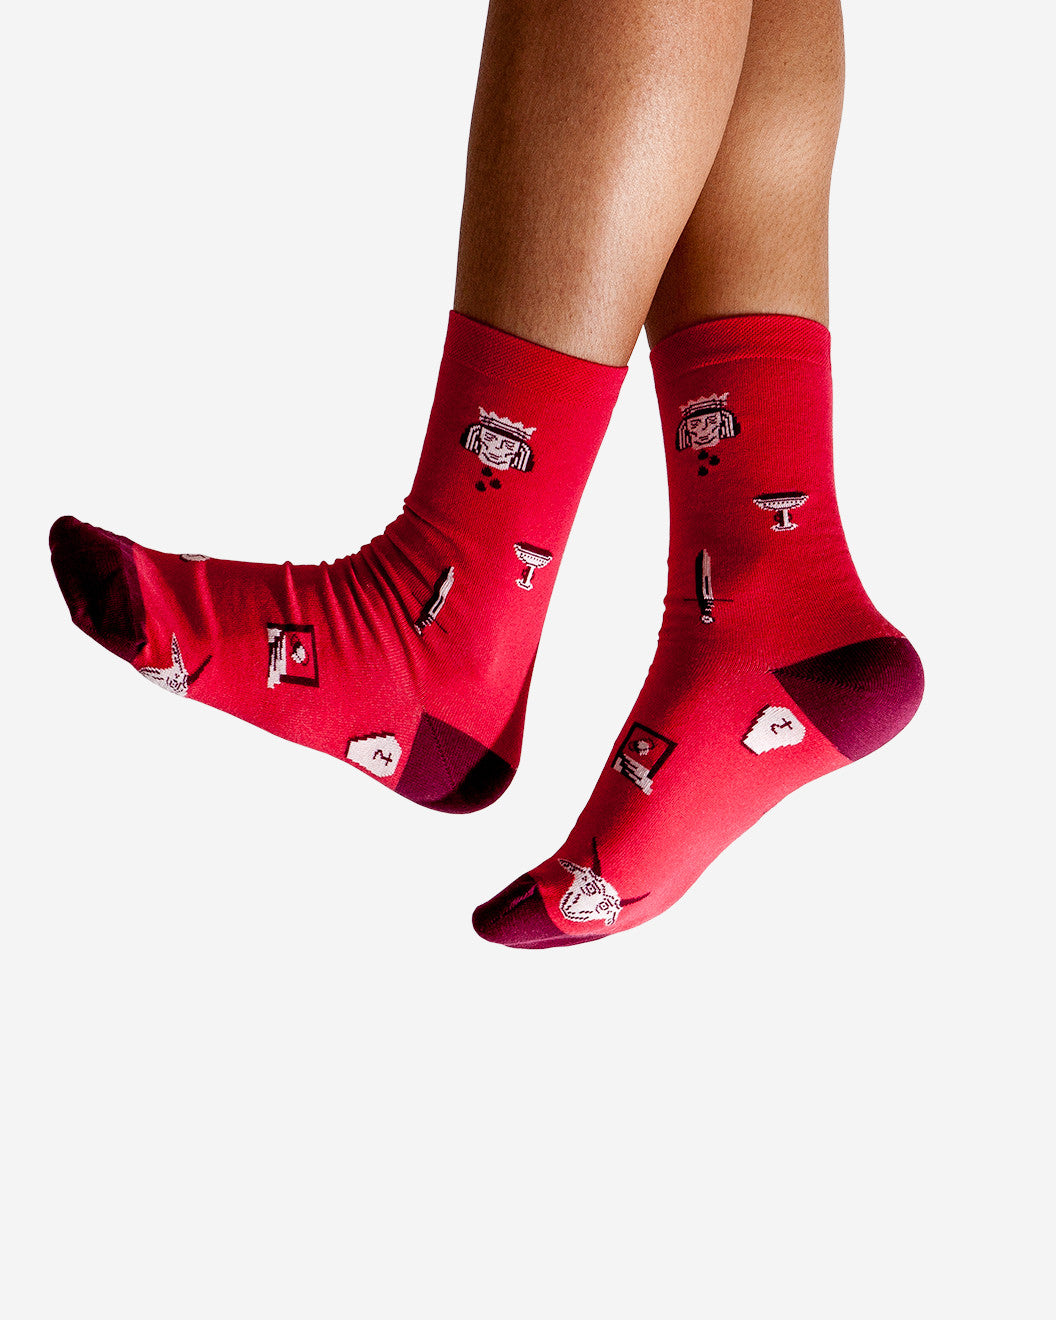 Red Occult Sock